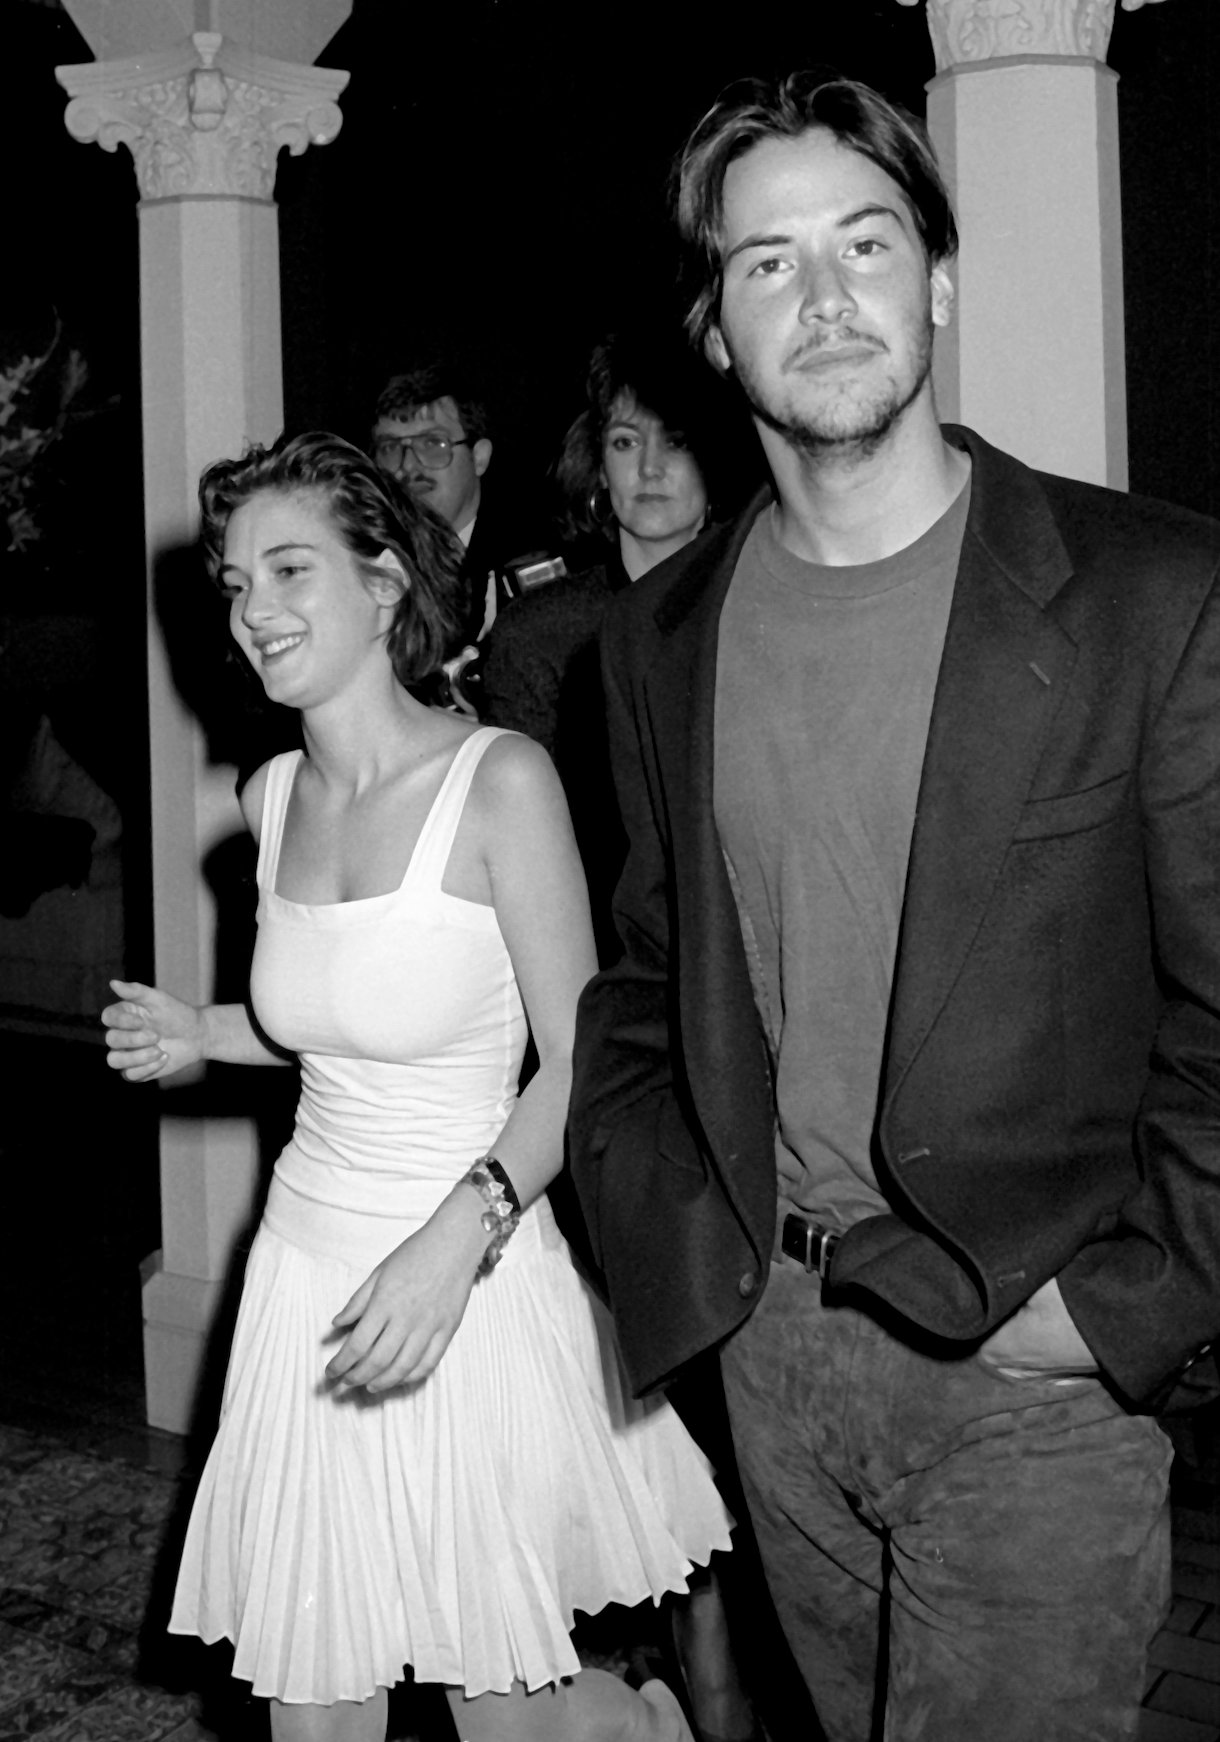 Winona Ryder and Keanu Reeves in 1989 at the Hollywood Roosevelt Hotel